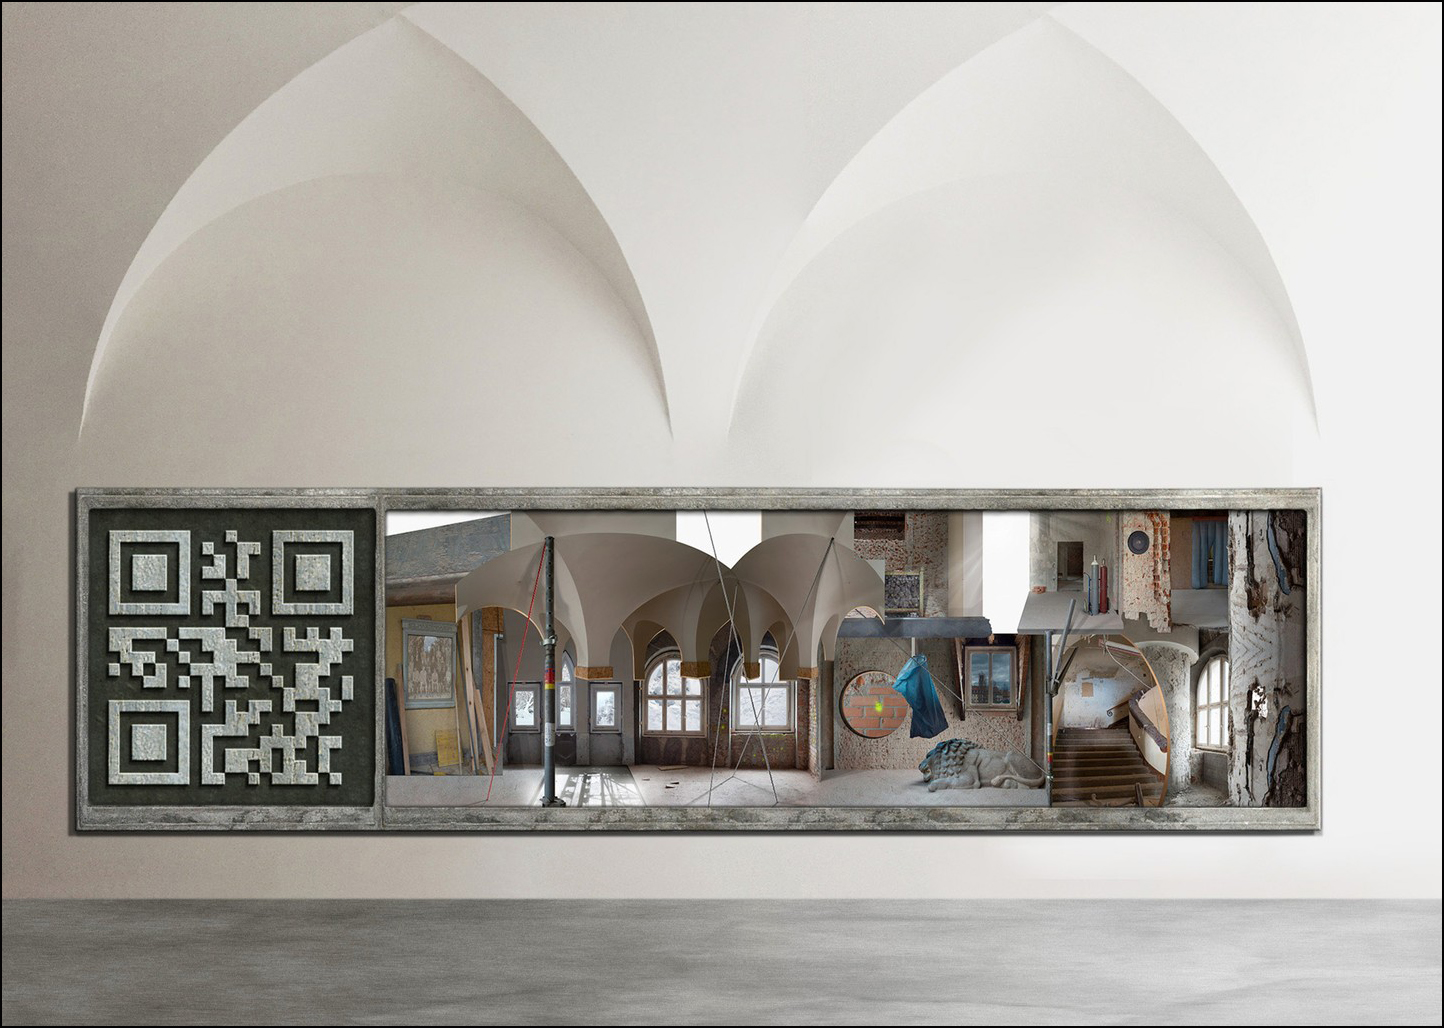 Digital Amnesia or Constructed Memory is now permanently installed at Munich's historic Maximilian Gymnasium. Explore the project on its exclusive <a href="https://da-cm.de/website/">website</a>